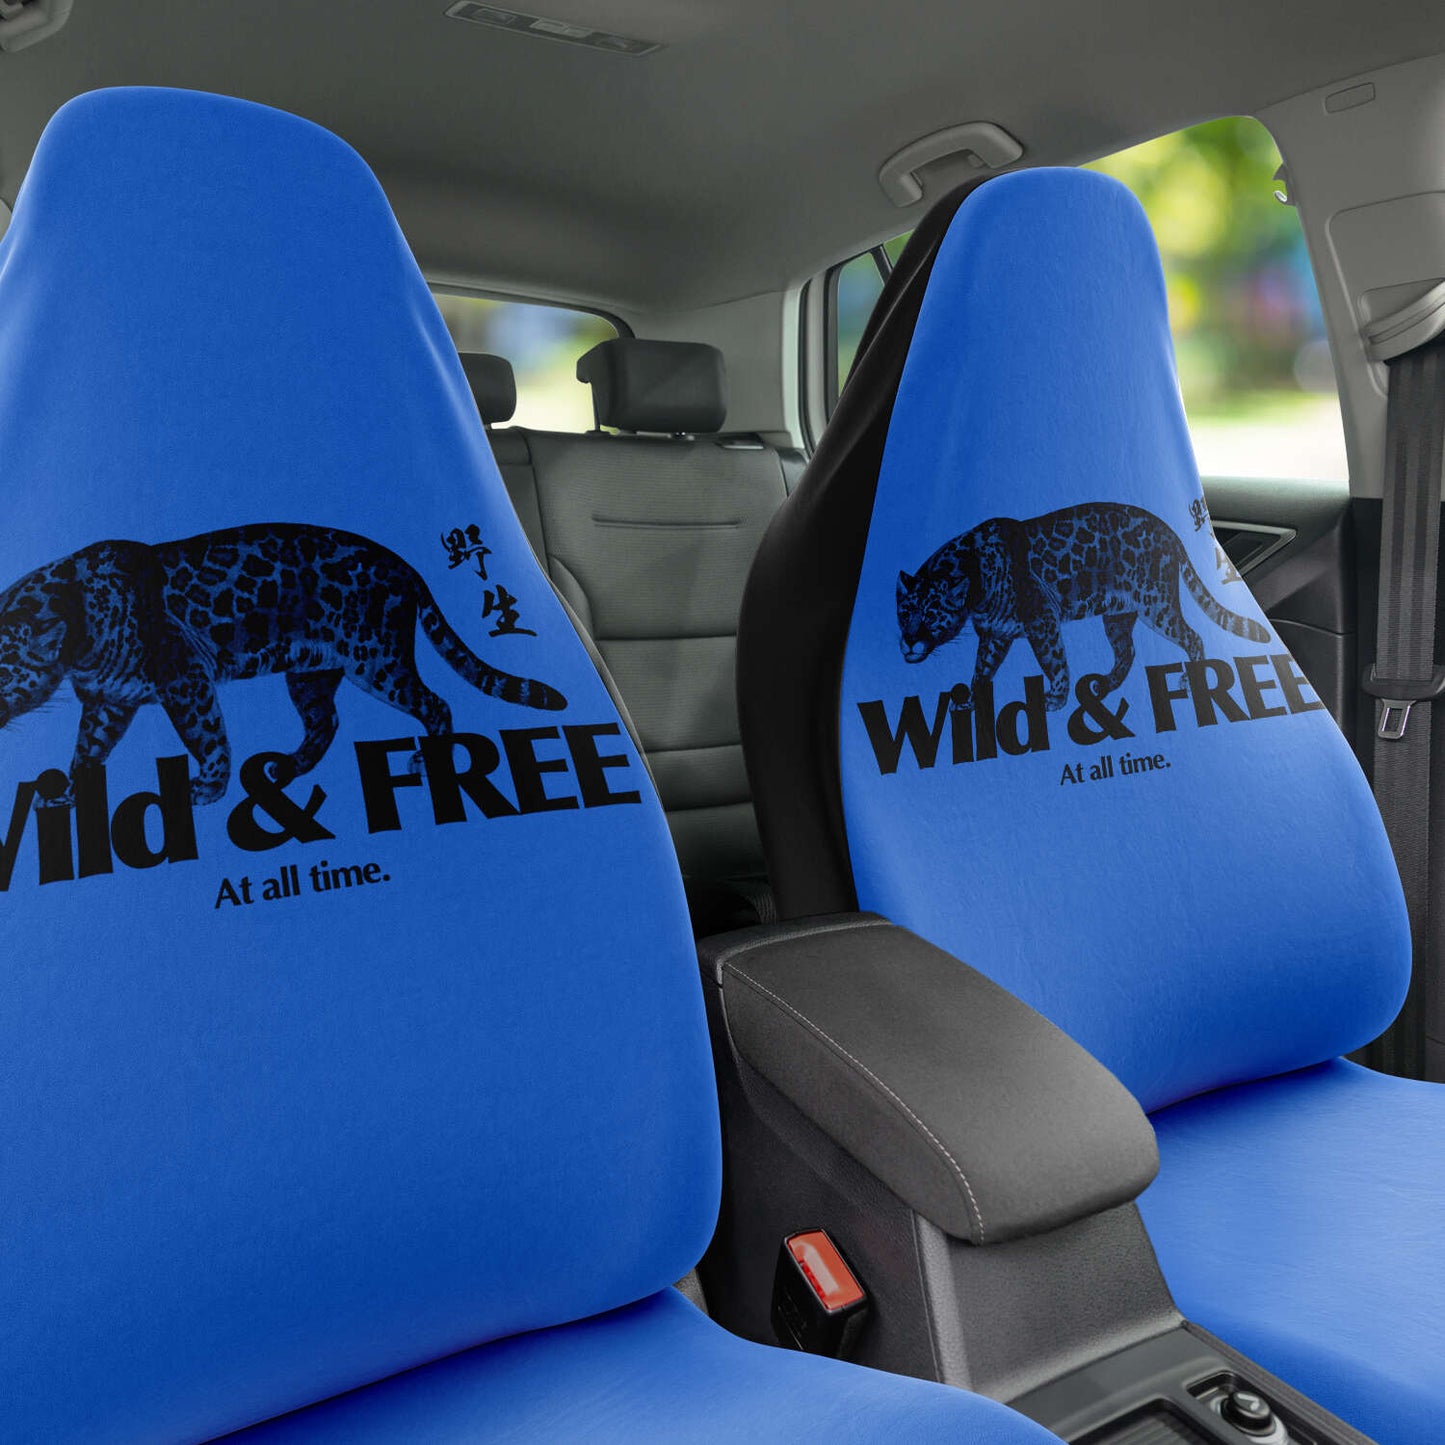 Wild & Free, at all time. 🐯 Panther Seat Covers Blue